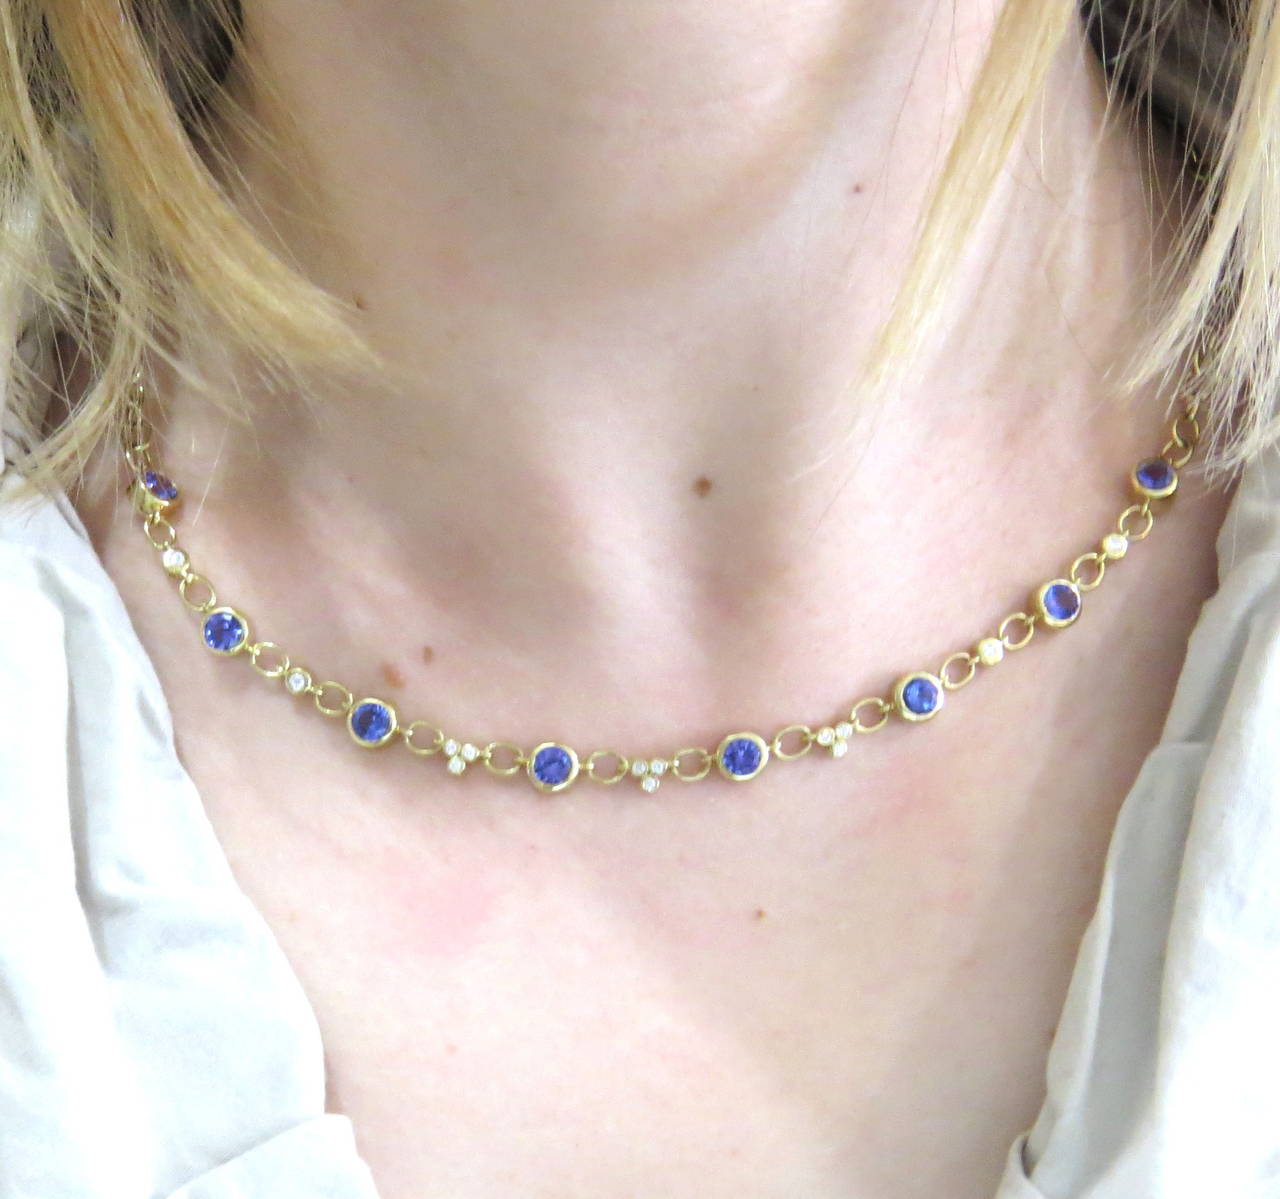 18k gold necklace by Temple St. Clair from Bellina collection, featuring round tanzanite gemstones and approx. 0.47cte in G/VS diamond spacers. Necklace is 19